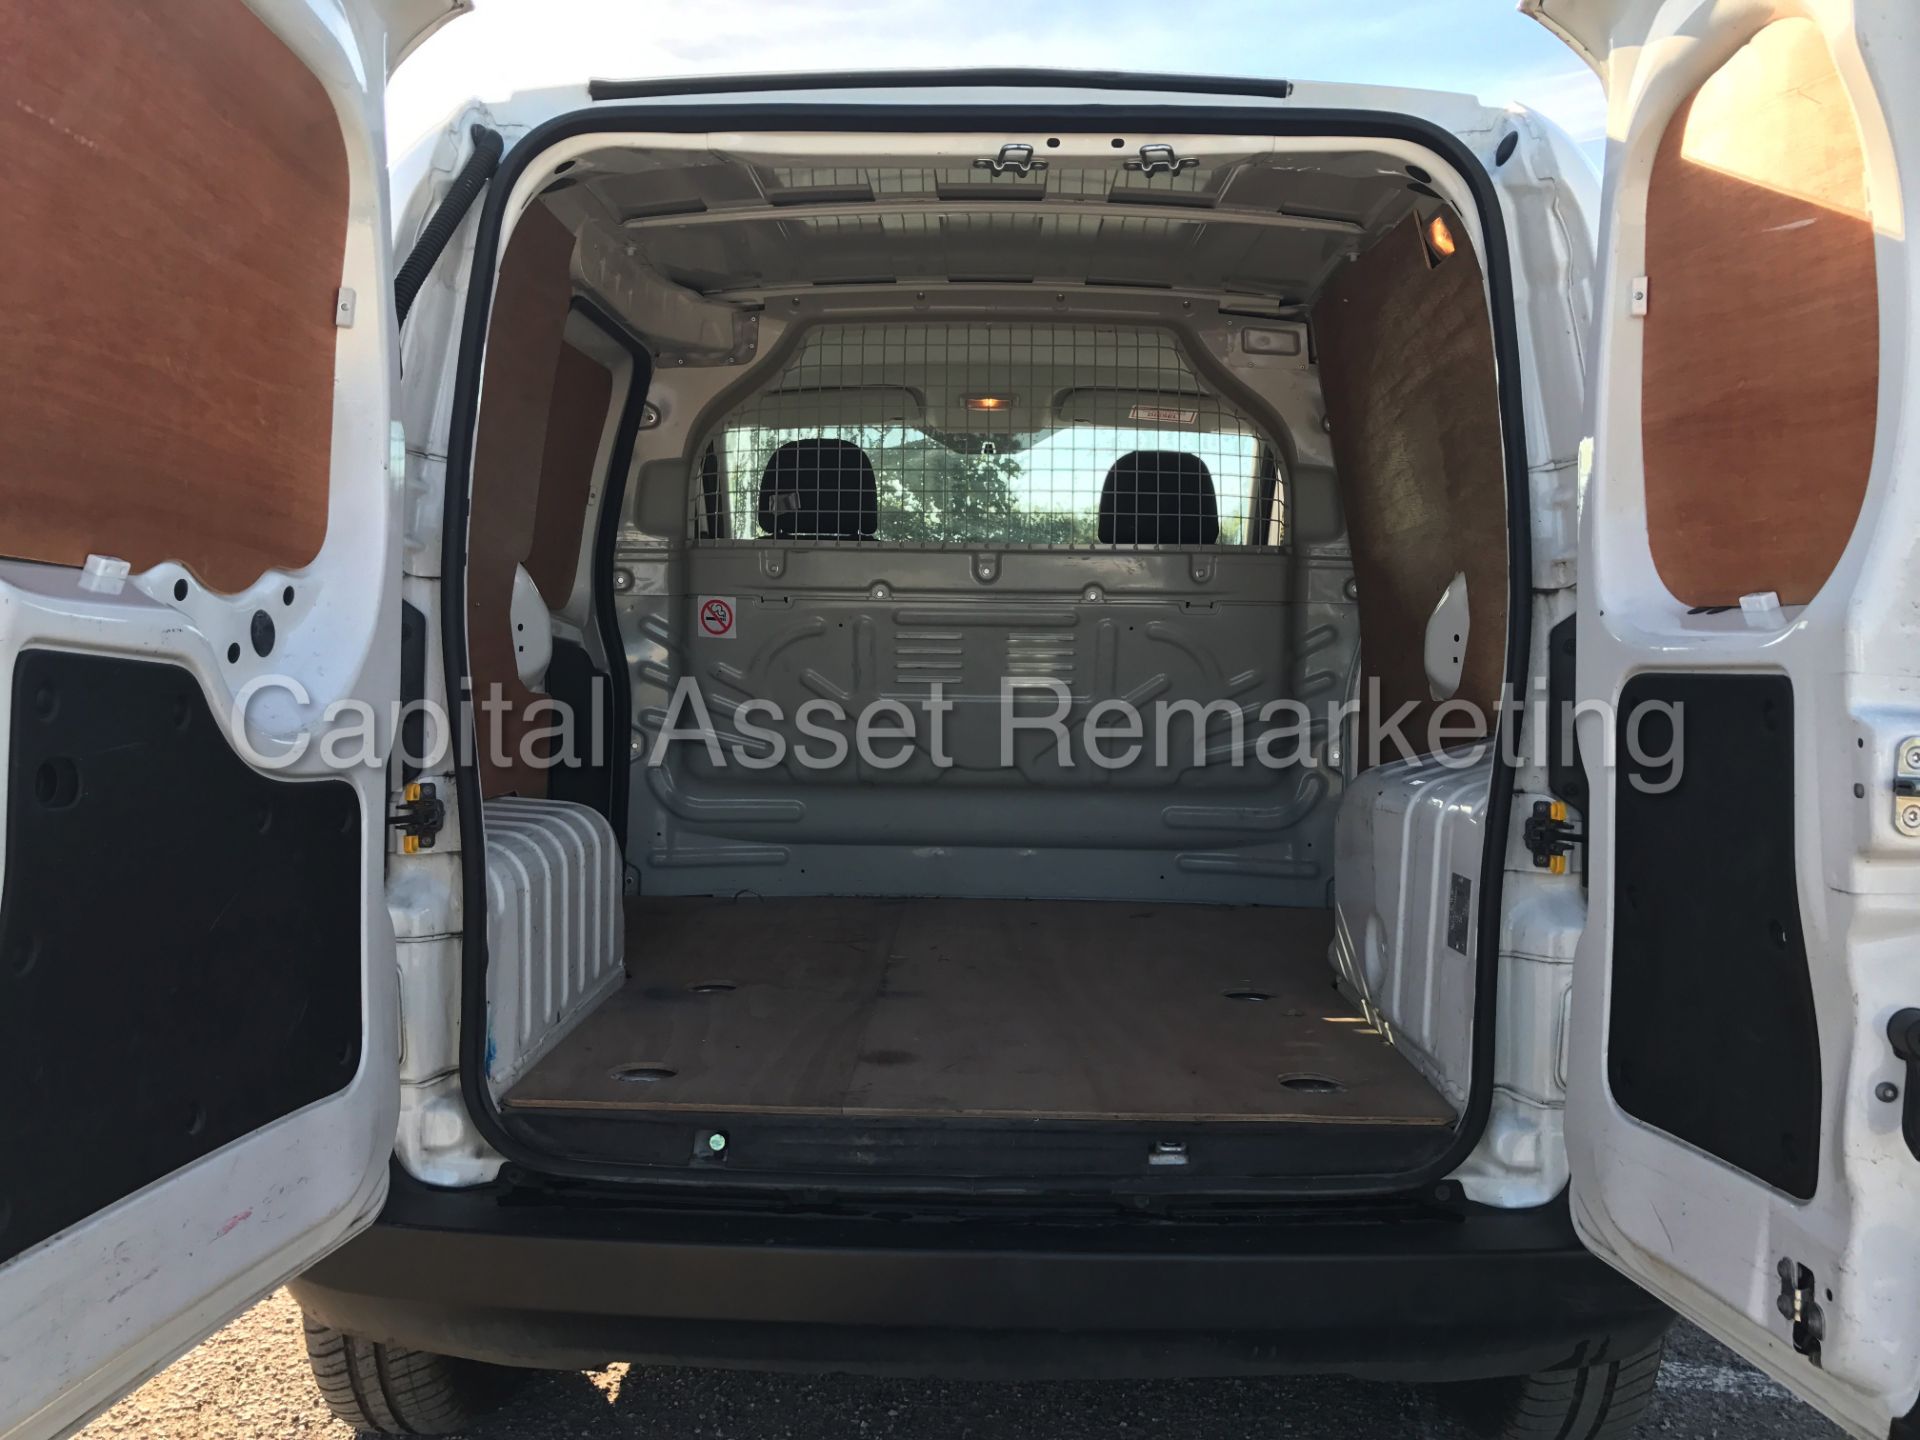 PEUGEOT BIPPER S (2014 MODEL) '1.2 HDI - DIESEL - ELEC PACK' (1 OWNER FROM NEW - FULL HISTORY) - Image 11 of 19